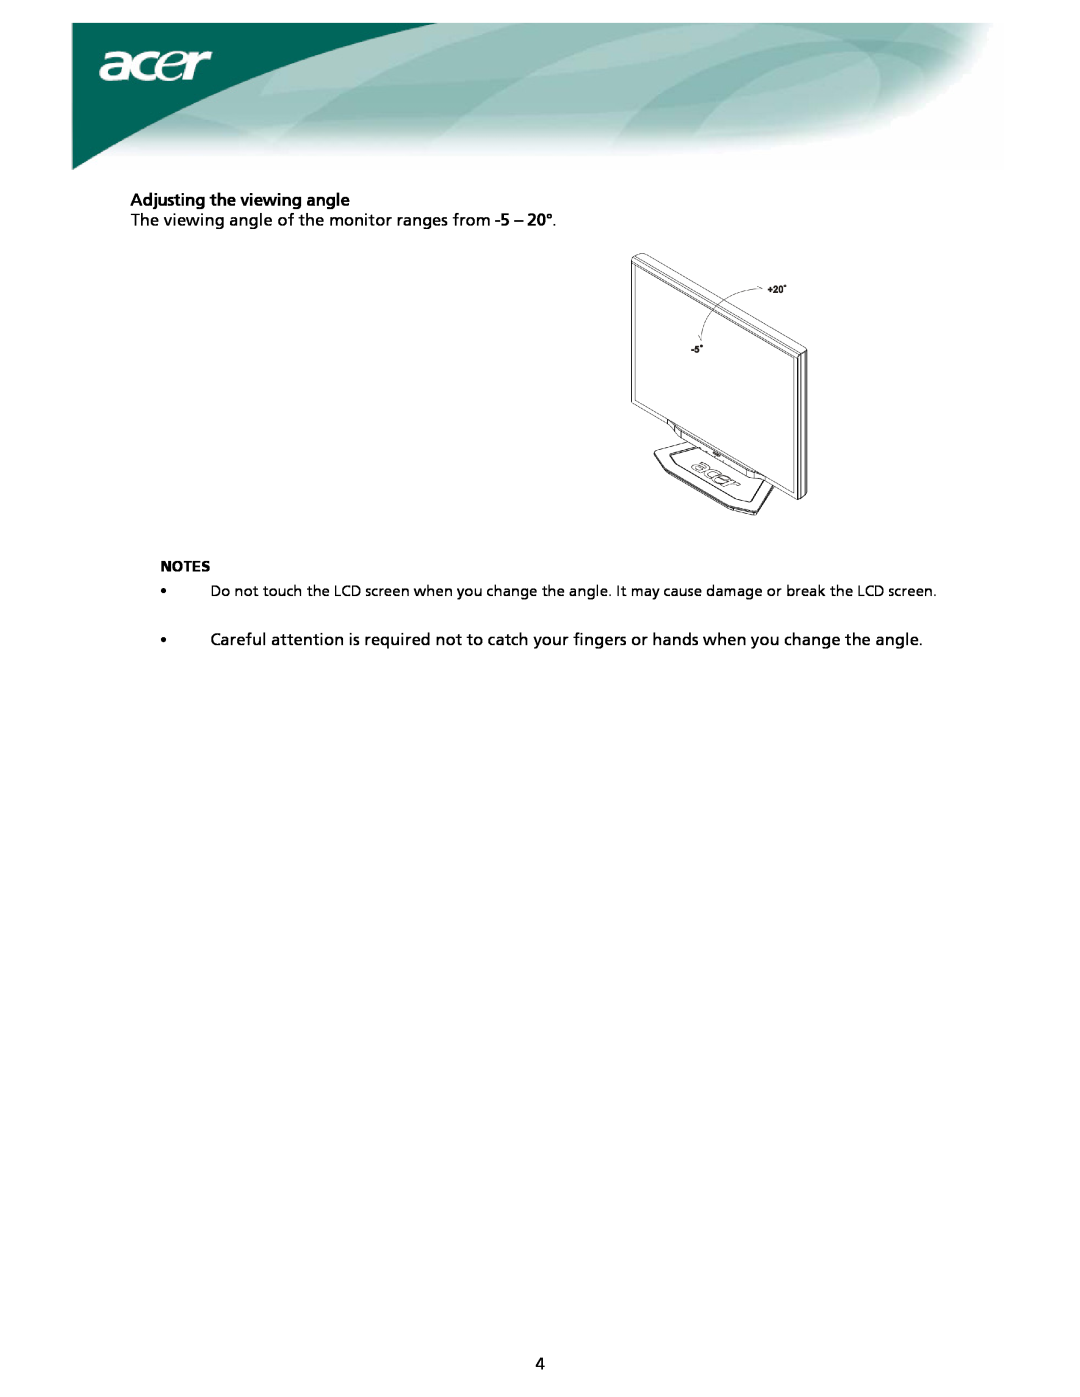 Acer X222W, X221W installation instructions Adjusting the viewing angle, The viewing angle of the monitor ranges from -5 